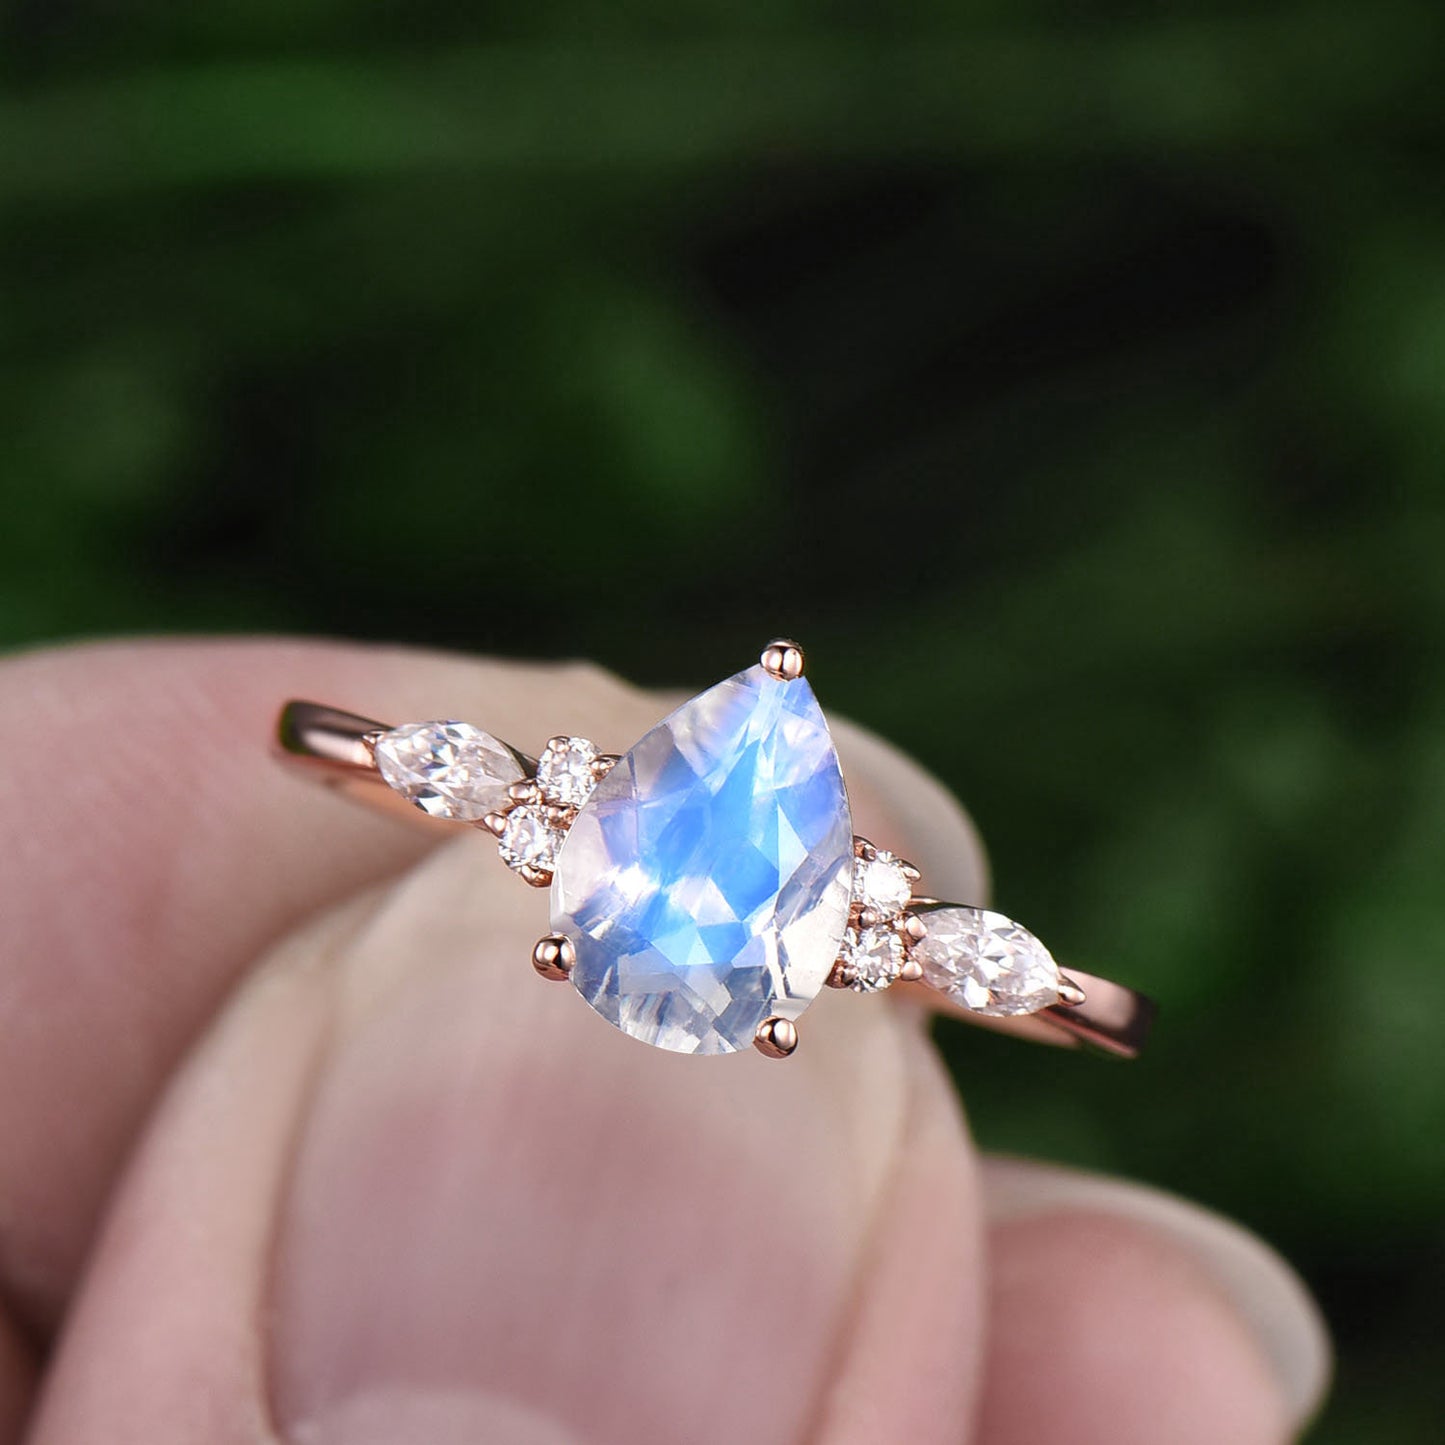 Pear shaped moonstone ring vintage moonstone engagement ring unique moissanite ring for women rose gold ring June birthstone jewelry gift